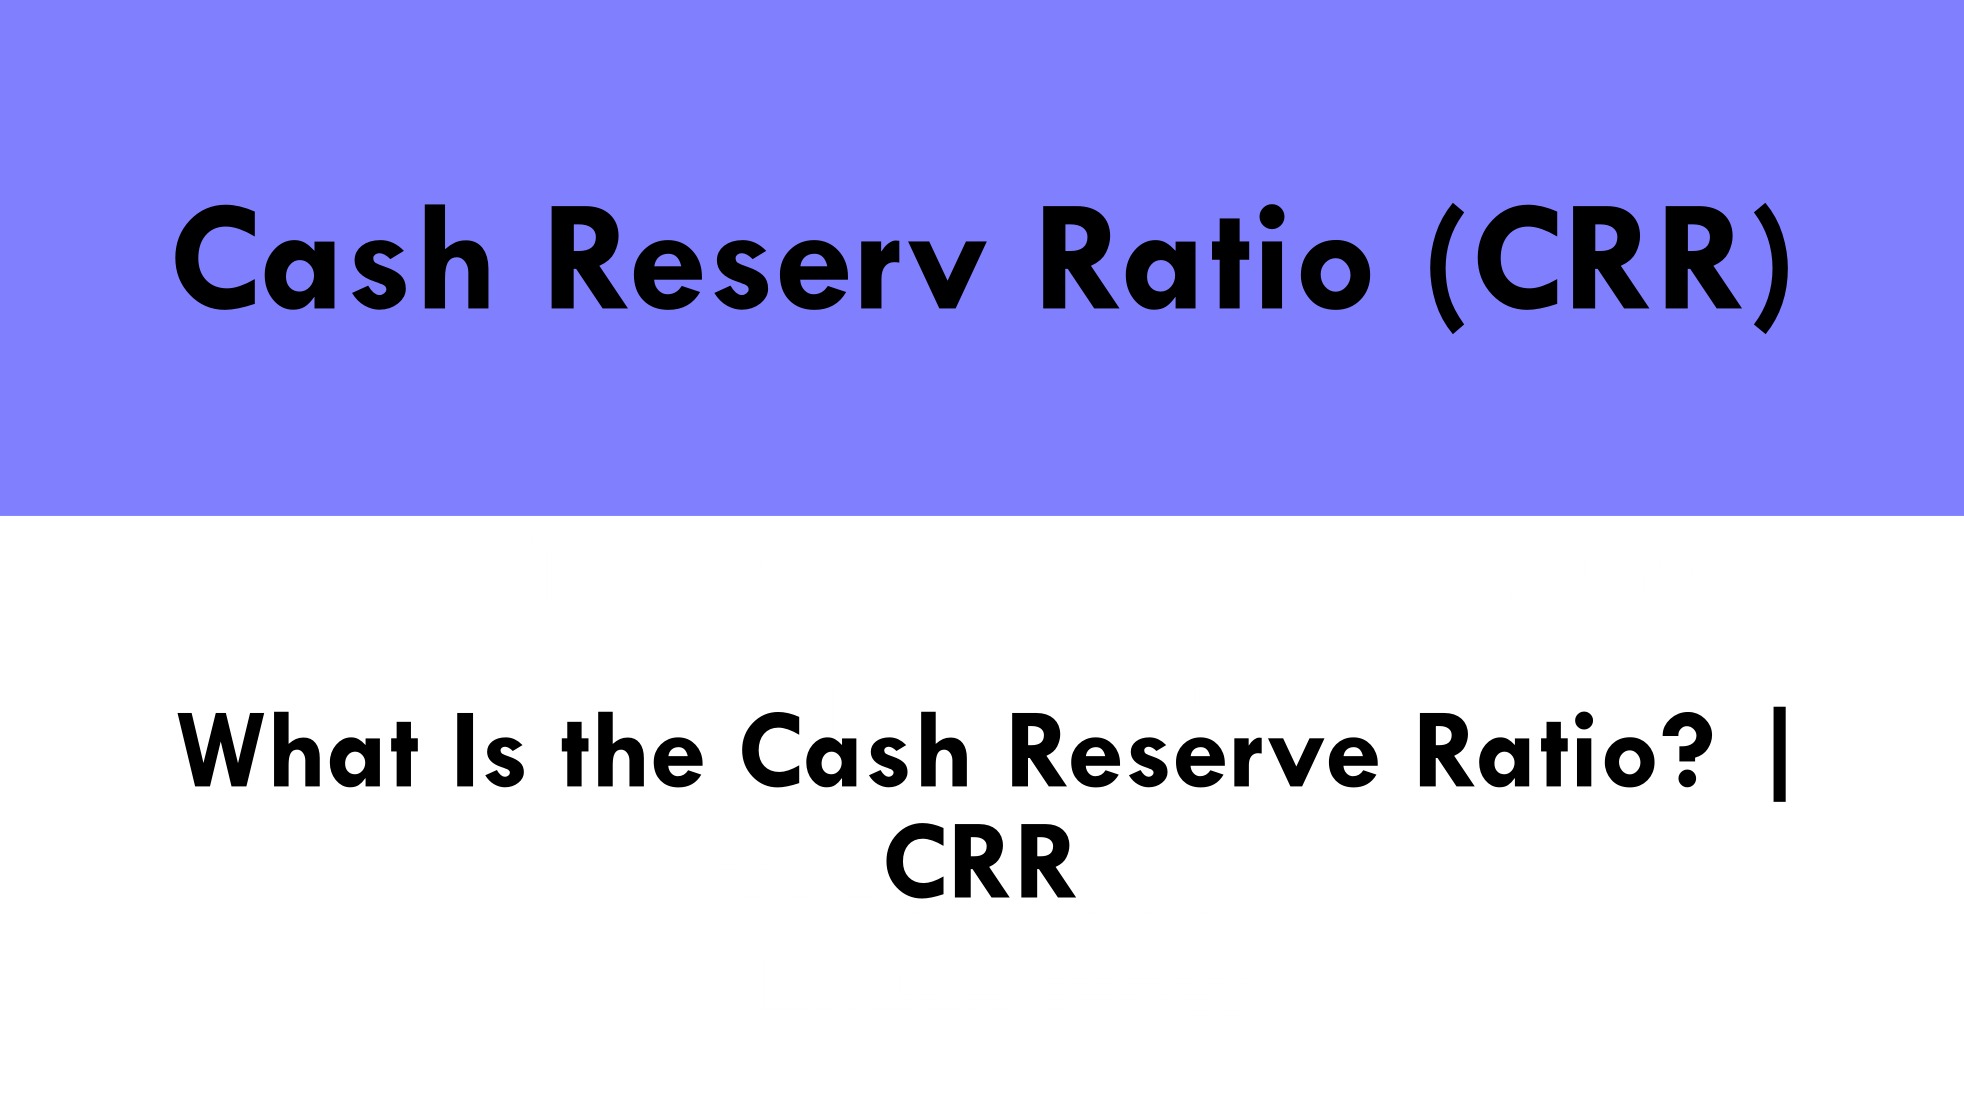 What Is the Cash Reserve Ratio